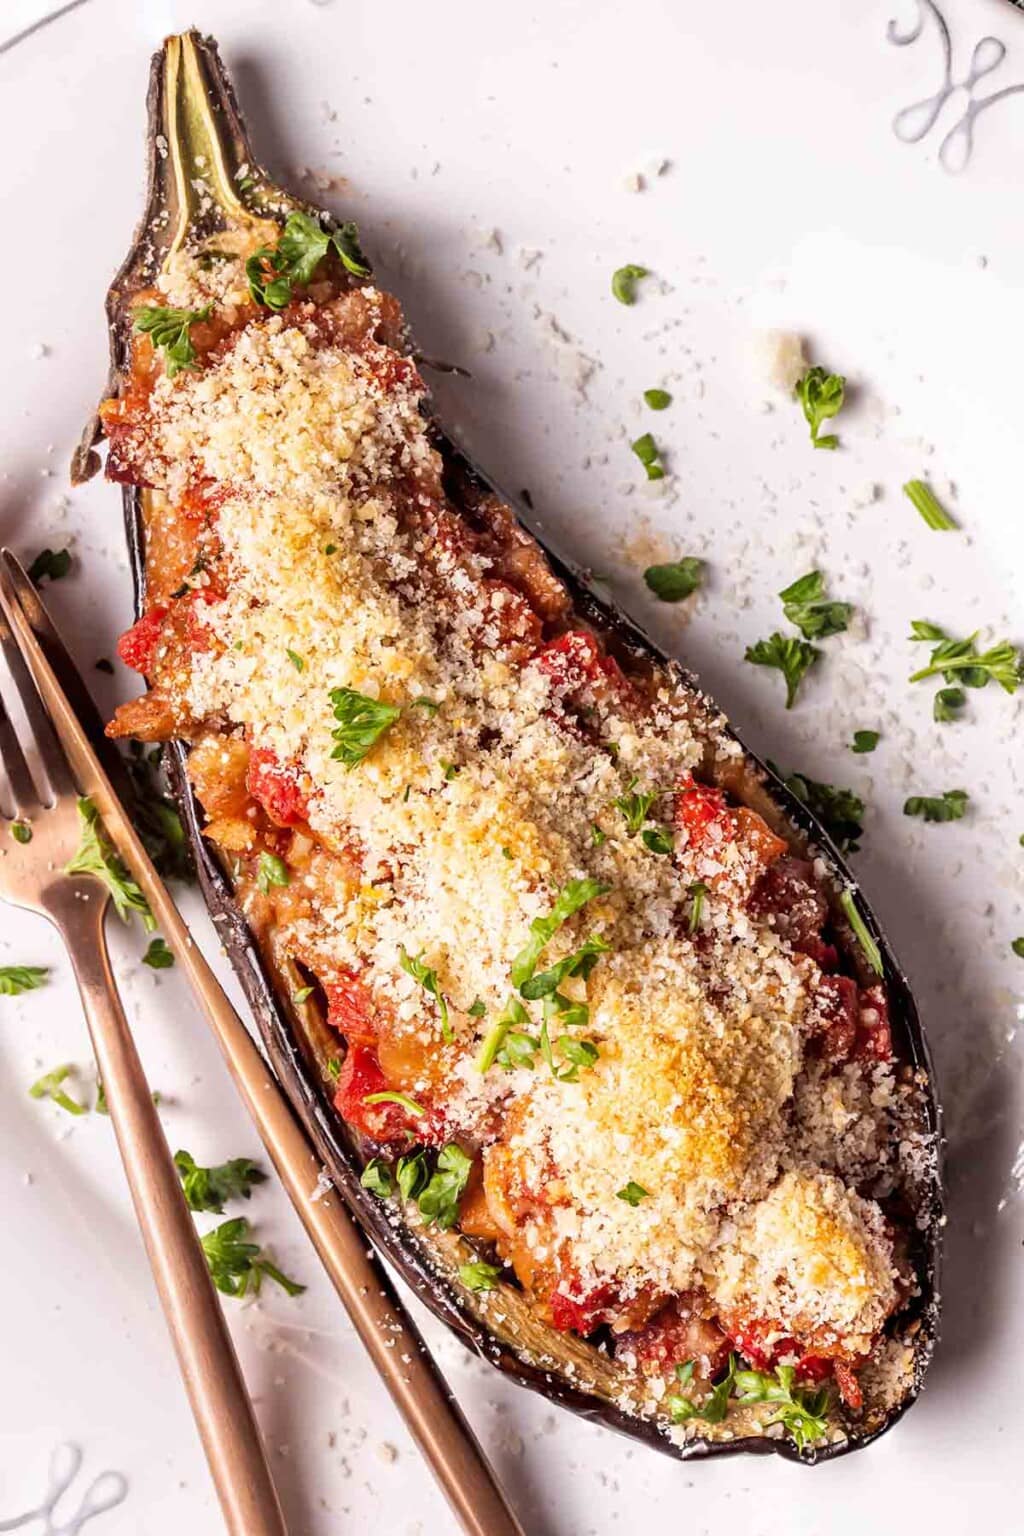 Eggplant Filled with Goodness